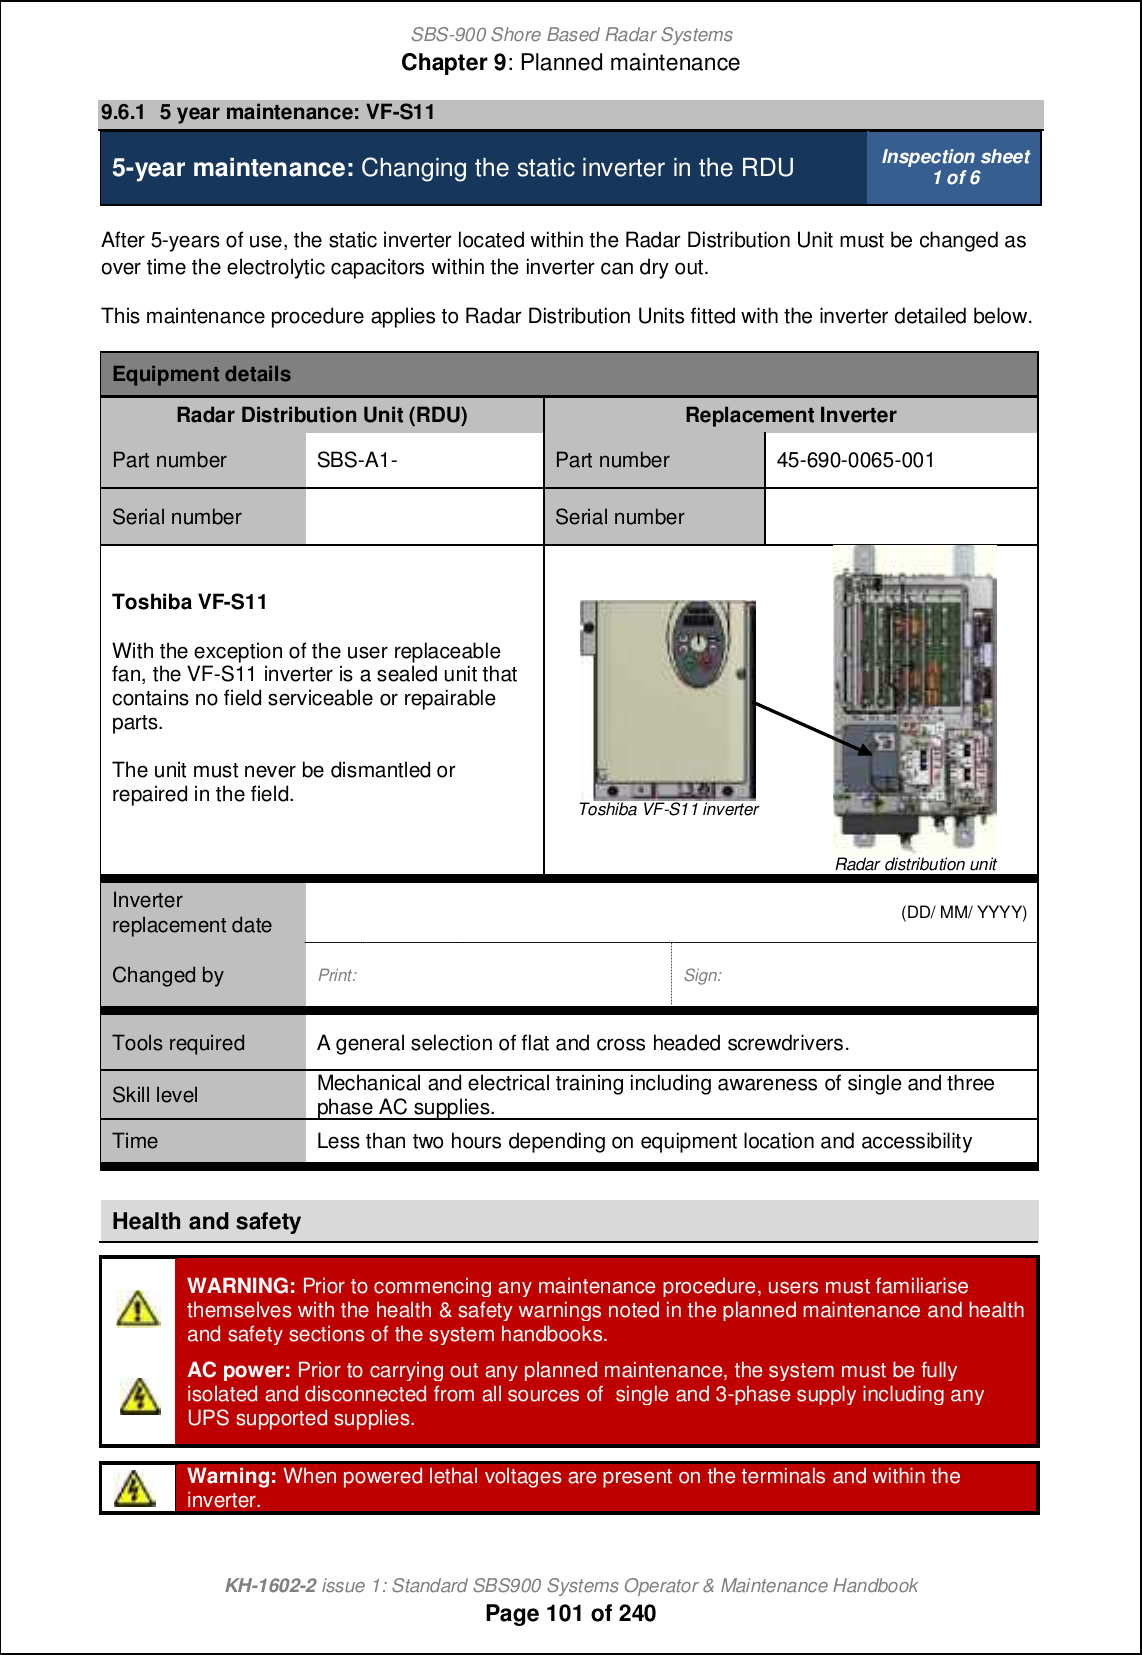 SBS-900 Shore Based Radar SystemsChapter 9: Planned maintenanceKH-1602-2 issue 1: Standard SBS900 Systems Operator &amp; Maintenance HandbookPage 101 of 2409.6.1 5 year maintenance: VF-S115-year maintenance: Changing the static inverter in the RDU Inspection sheet1 of 6After 5-years of use, the static inverter located within the Radar Distribution Unit must be changed asover time the electrolytic capacitors within the inverter can dry out.This maintenance procedure applies to Radar Distribution Units fitted with the inverter detailed below.Equipment detailsRadar Distribution Unit (RDU) Replacement InverterPart number SBS-A1- Part number 45-690-0065-001Serial number Serial numberToshiba VF-S11With the exception of the user replaceablefan, the VF-S11 inverter is a sealed unit thatcontains no field serviceable or repairableparts.The unit must never be dismantled orrepaired in the field. Toshiba VF-S11 inverterRadar distribution unitInverterreplacement date (DD/ MM/ YYYY)Changed by Print: Sign:Tools required A general selection of flat and cross headed screwdrivers.Skill level Mechanical and electrical training including awareness of single and threephase AC supplies.Time Less than two hours depending on equipment location and accessibilityHealth and safetyWARNING: Prior to commencing any maintenance procedure, users must familiarisethemselves with the health &amp; safety warnings noted in the planned maintenance and healthand safety sections of the system handbooks.AC power: Prior to carrying out any planned maintenance, the system must be fullyisolated and disconnected from all sources of single and 3-phase supply including anyUPS supported supplies.Warning: When powered lethal voltages are present on the terminals and within theinverter.